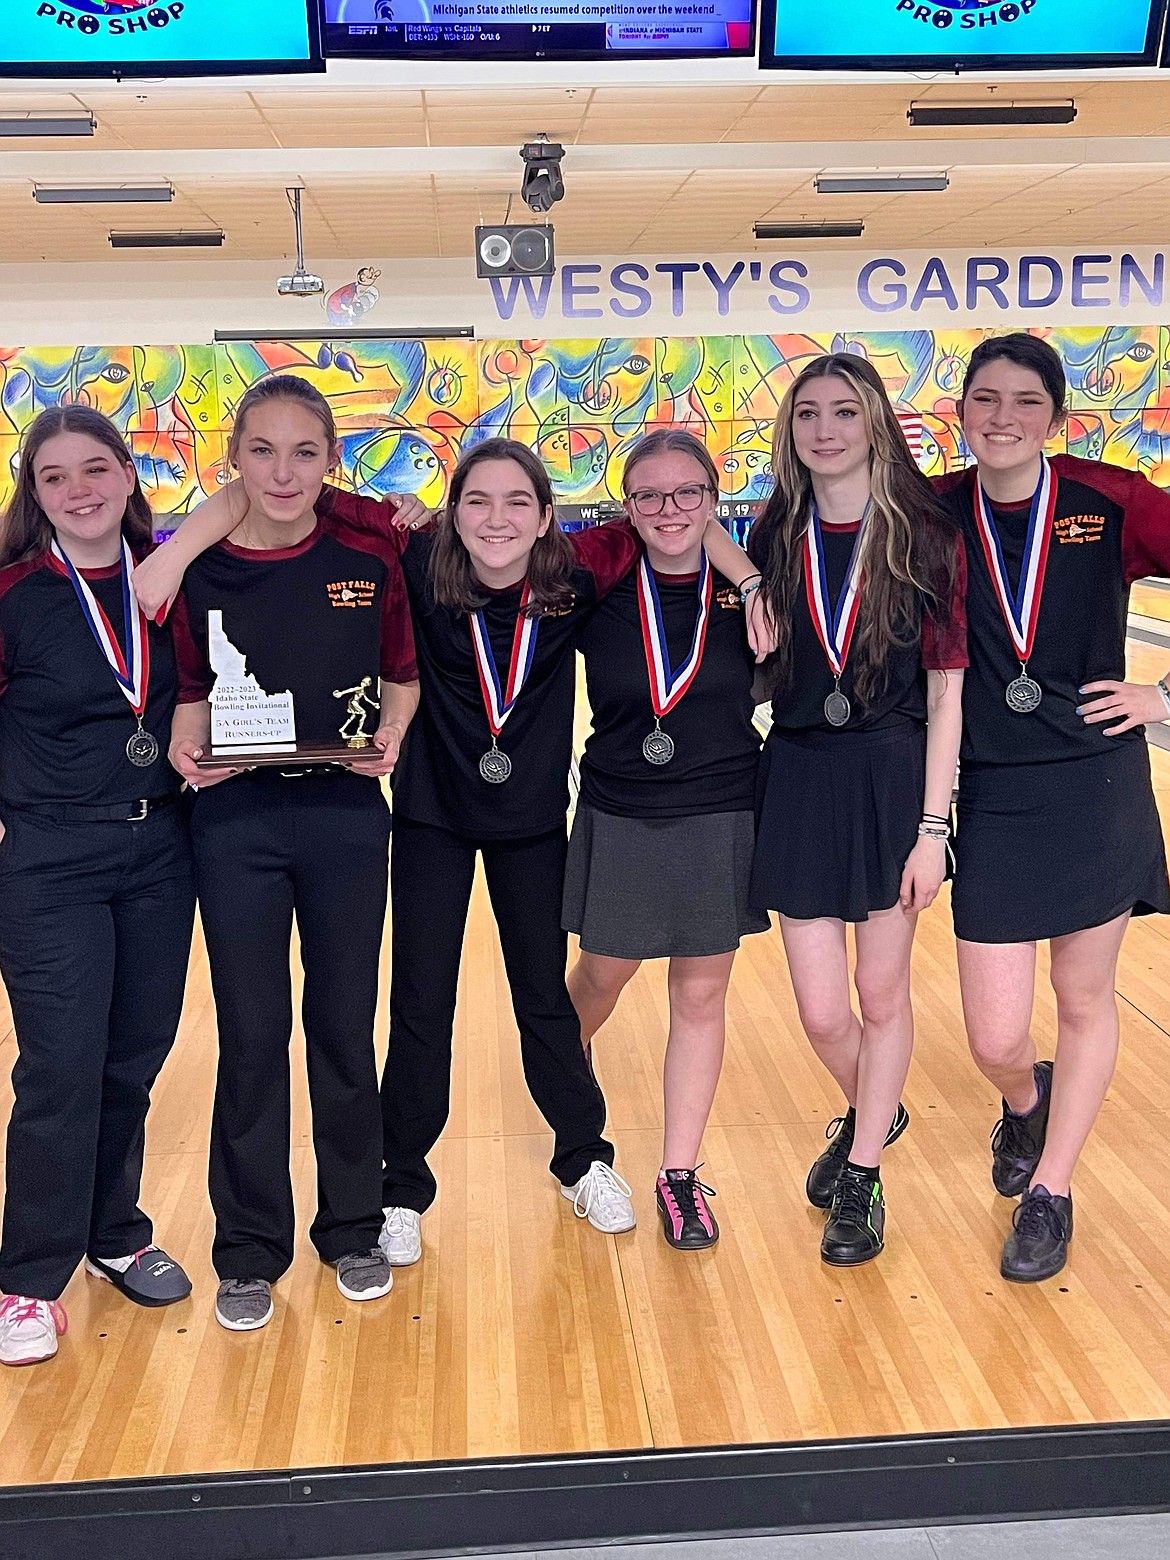 Courtesy photo
The Post Falls High School girls took first place in 5A at the recently state bowling championships in Garden City. From left are Jordyn Cord, Alliana Rider (also took second place in girls singles), Addison Mueller, Ryllee Kaup, Roxy Cummings and Reagan Clifton.